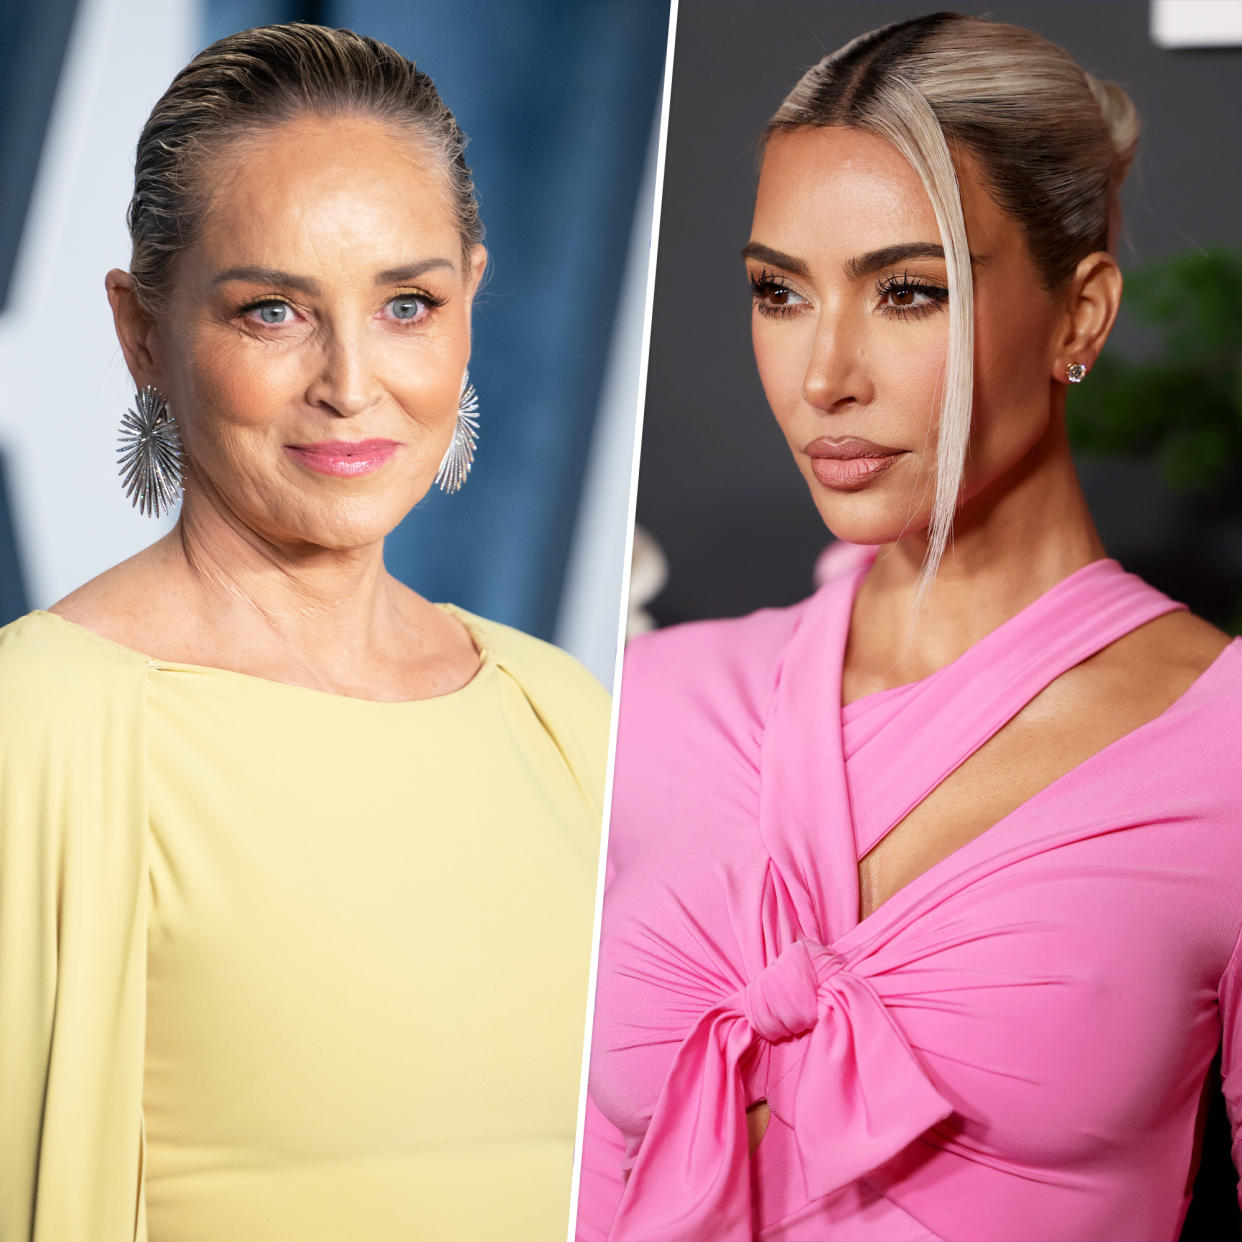 Sharon Stone has thoughts after Patti LuPone criticized Kim Kardashian’s ‘American Horror Story’ role